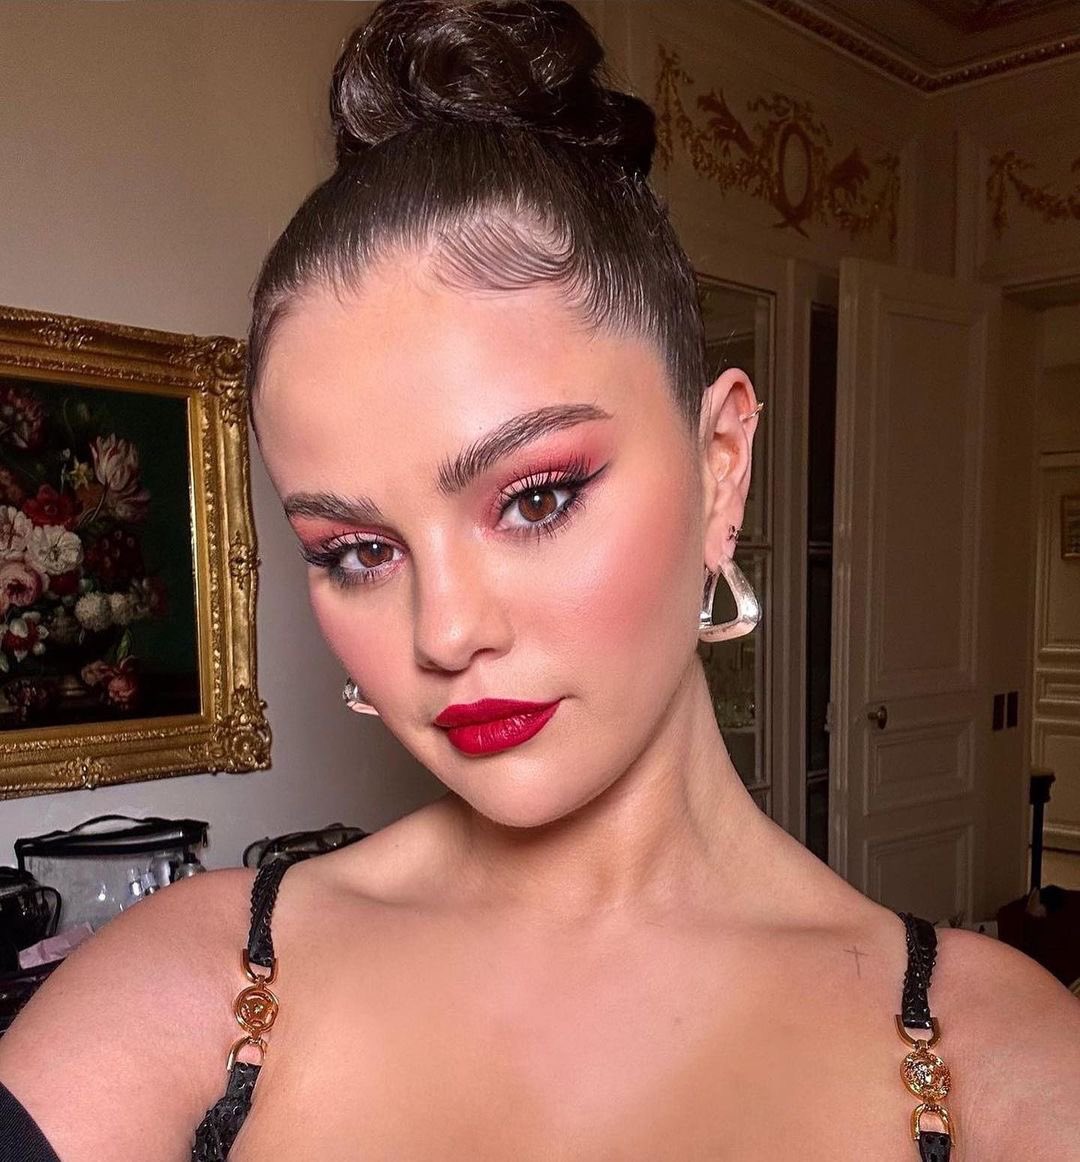 Posted by @domseeleyParisian Chic @selenagomez ??Sculptured Up done hair @domseeley Makeup @vivis_makeup #selenagomez #paris #pfw #hair #sculpture #updo #hairup #glam #makeup #rarebeauty